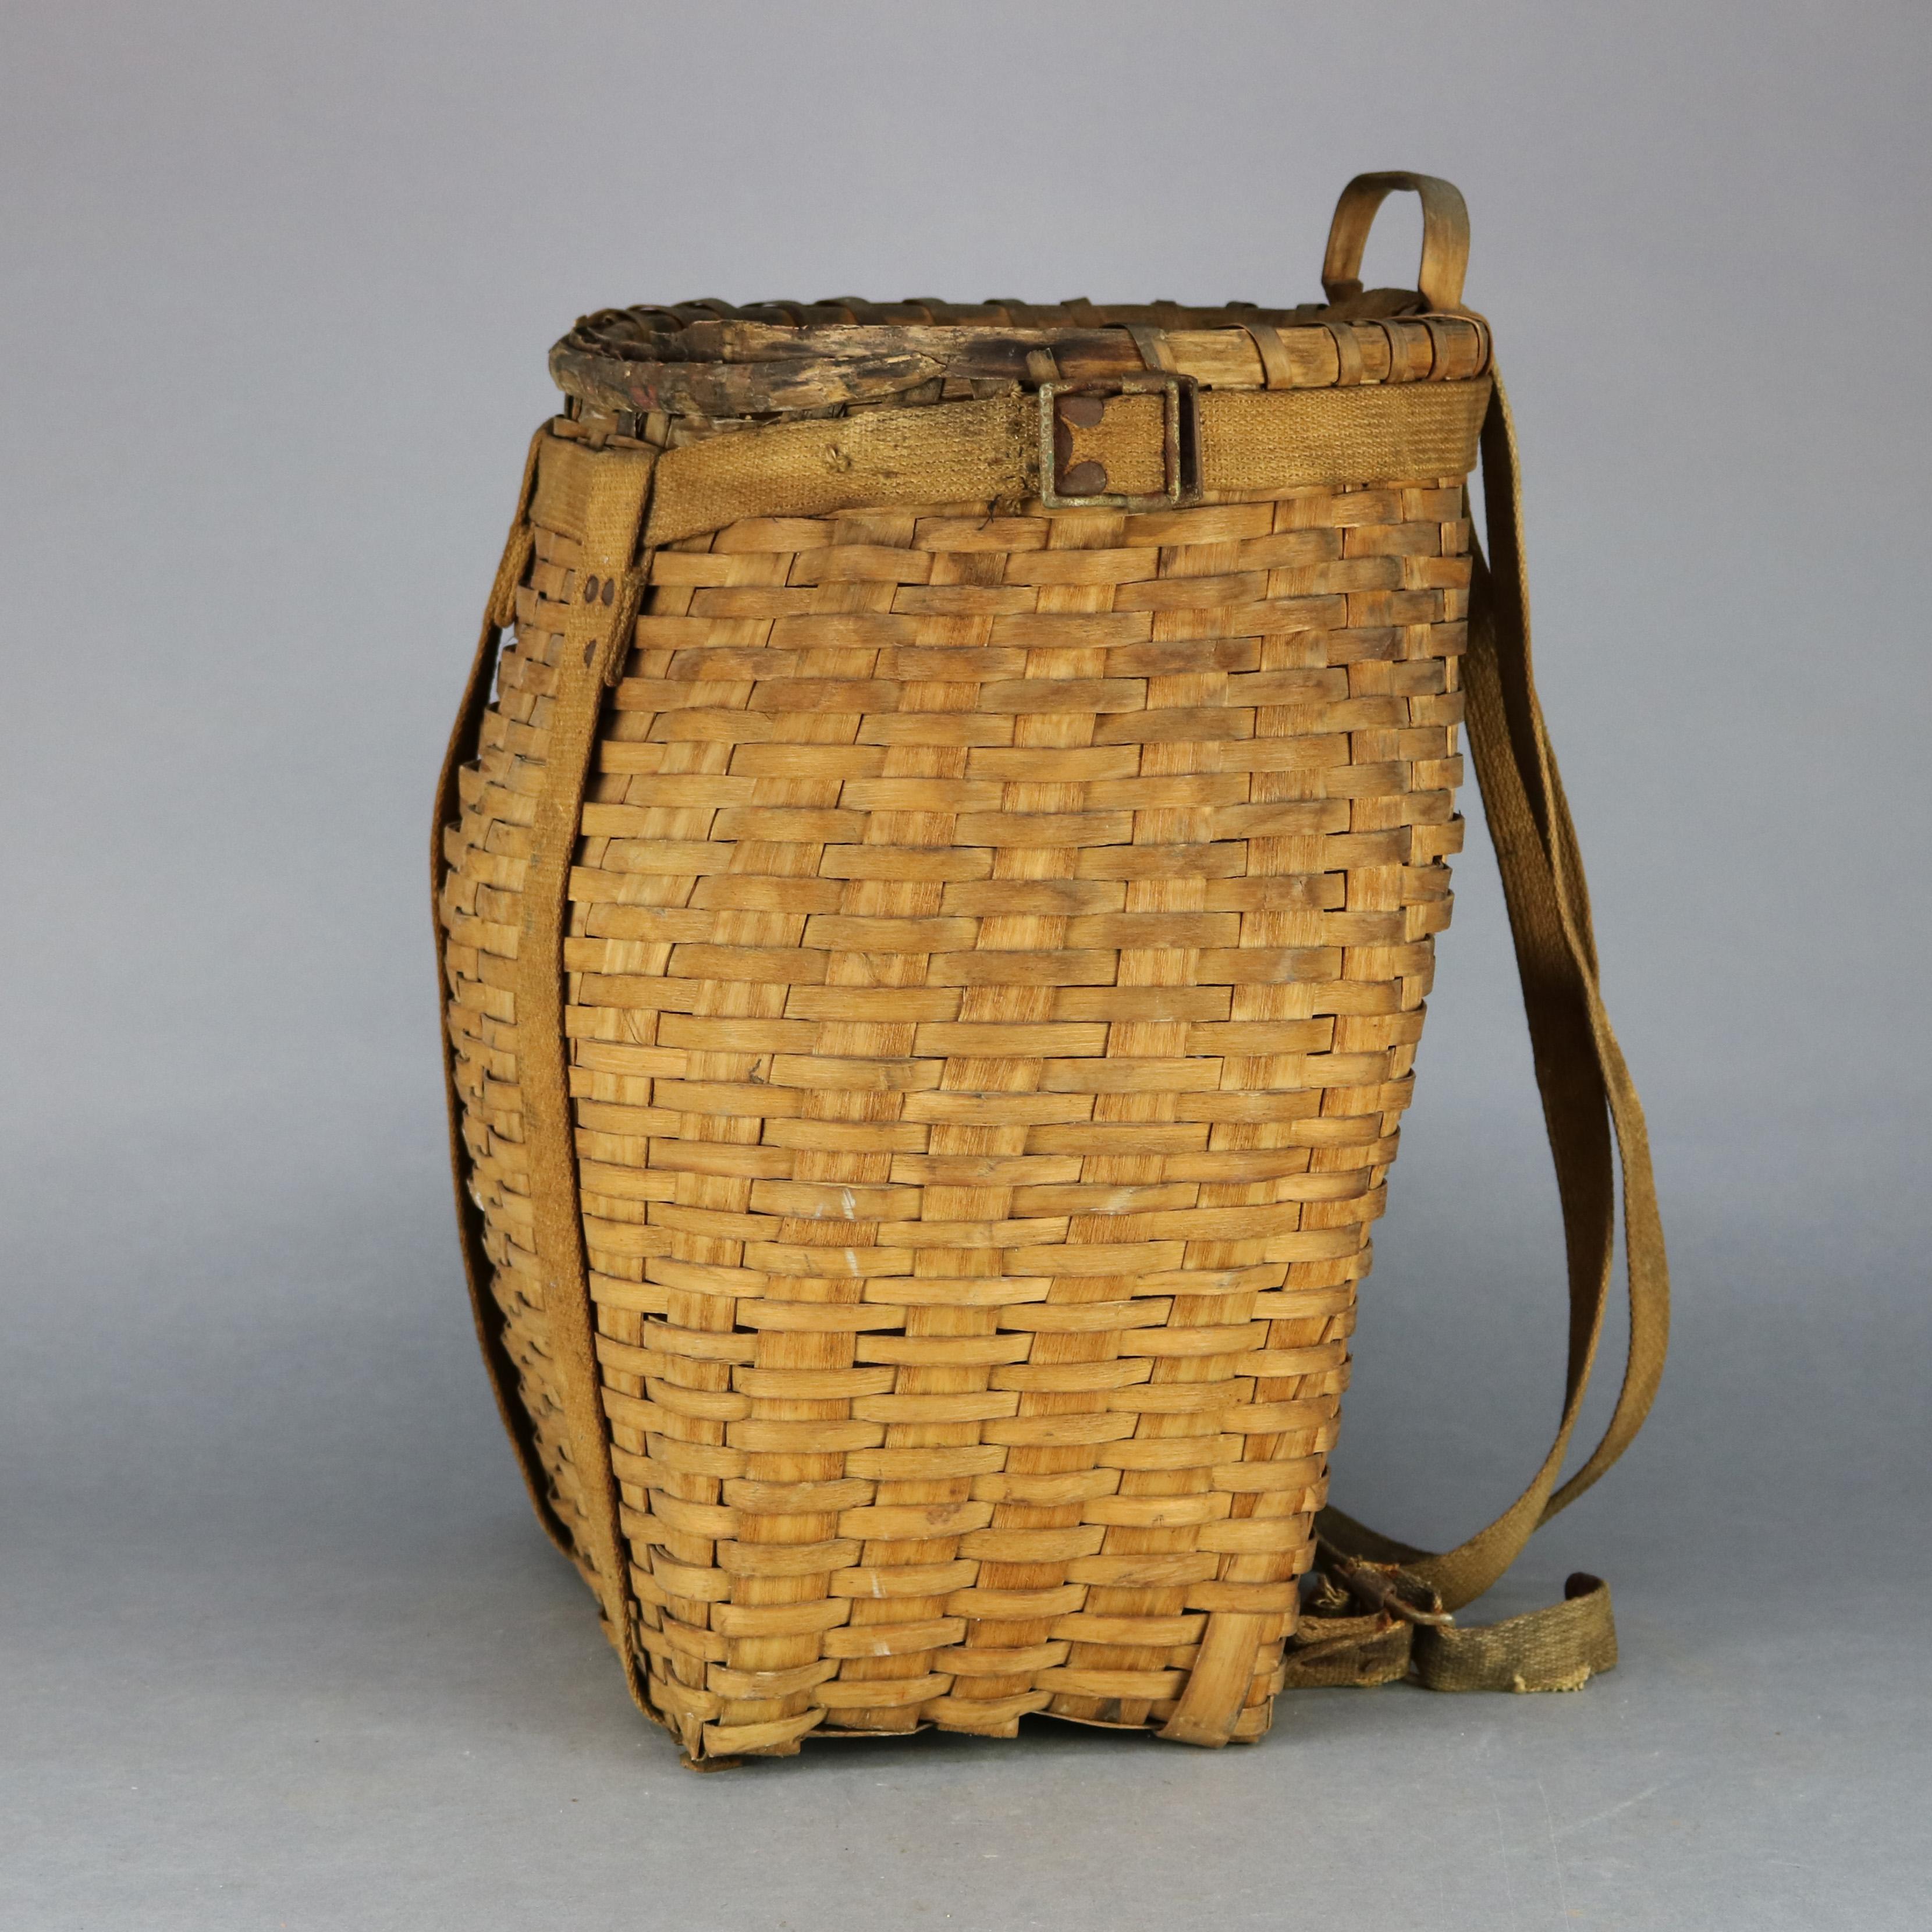 An antique Adirondack pack basket offers molded reed frame with handle, woven ash basket and fabric strap and buckle harness, circa 1910.

Measures: 20